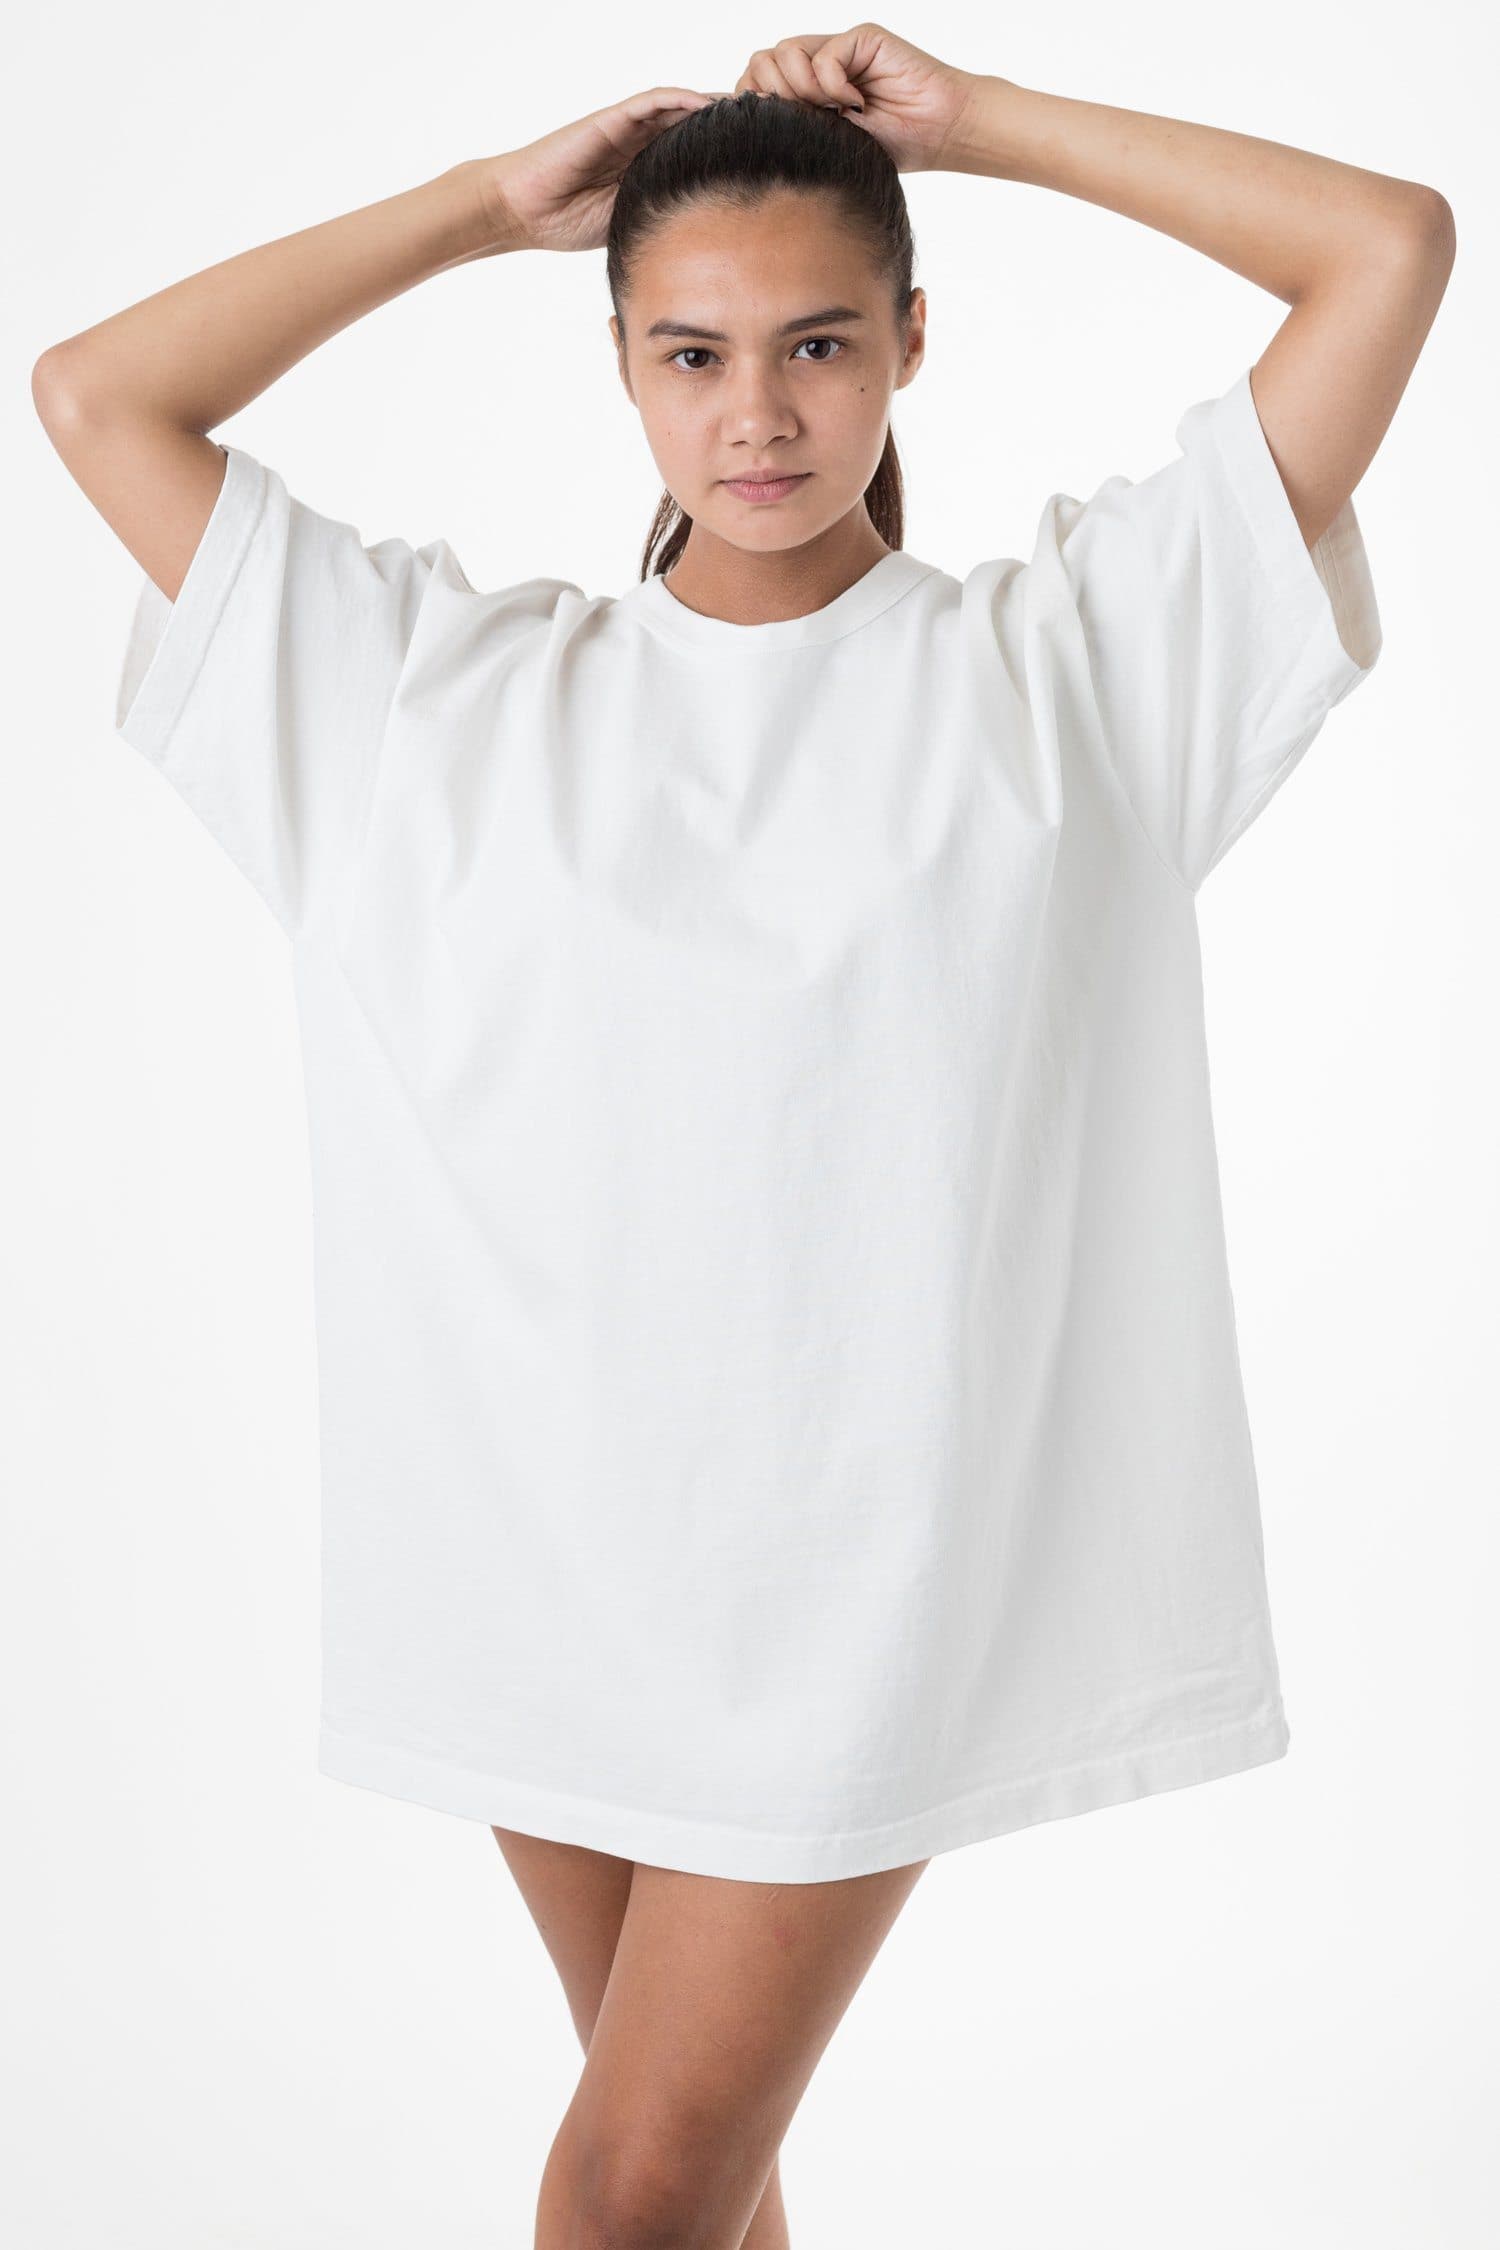 Los Angeles Apparel | Shirt for Women in Off White, Size Medium